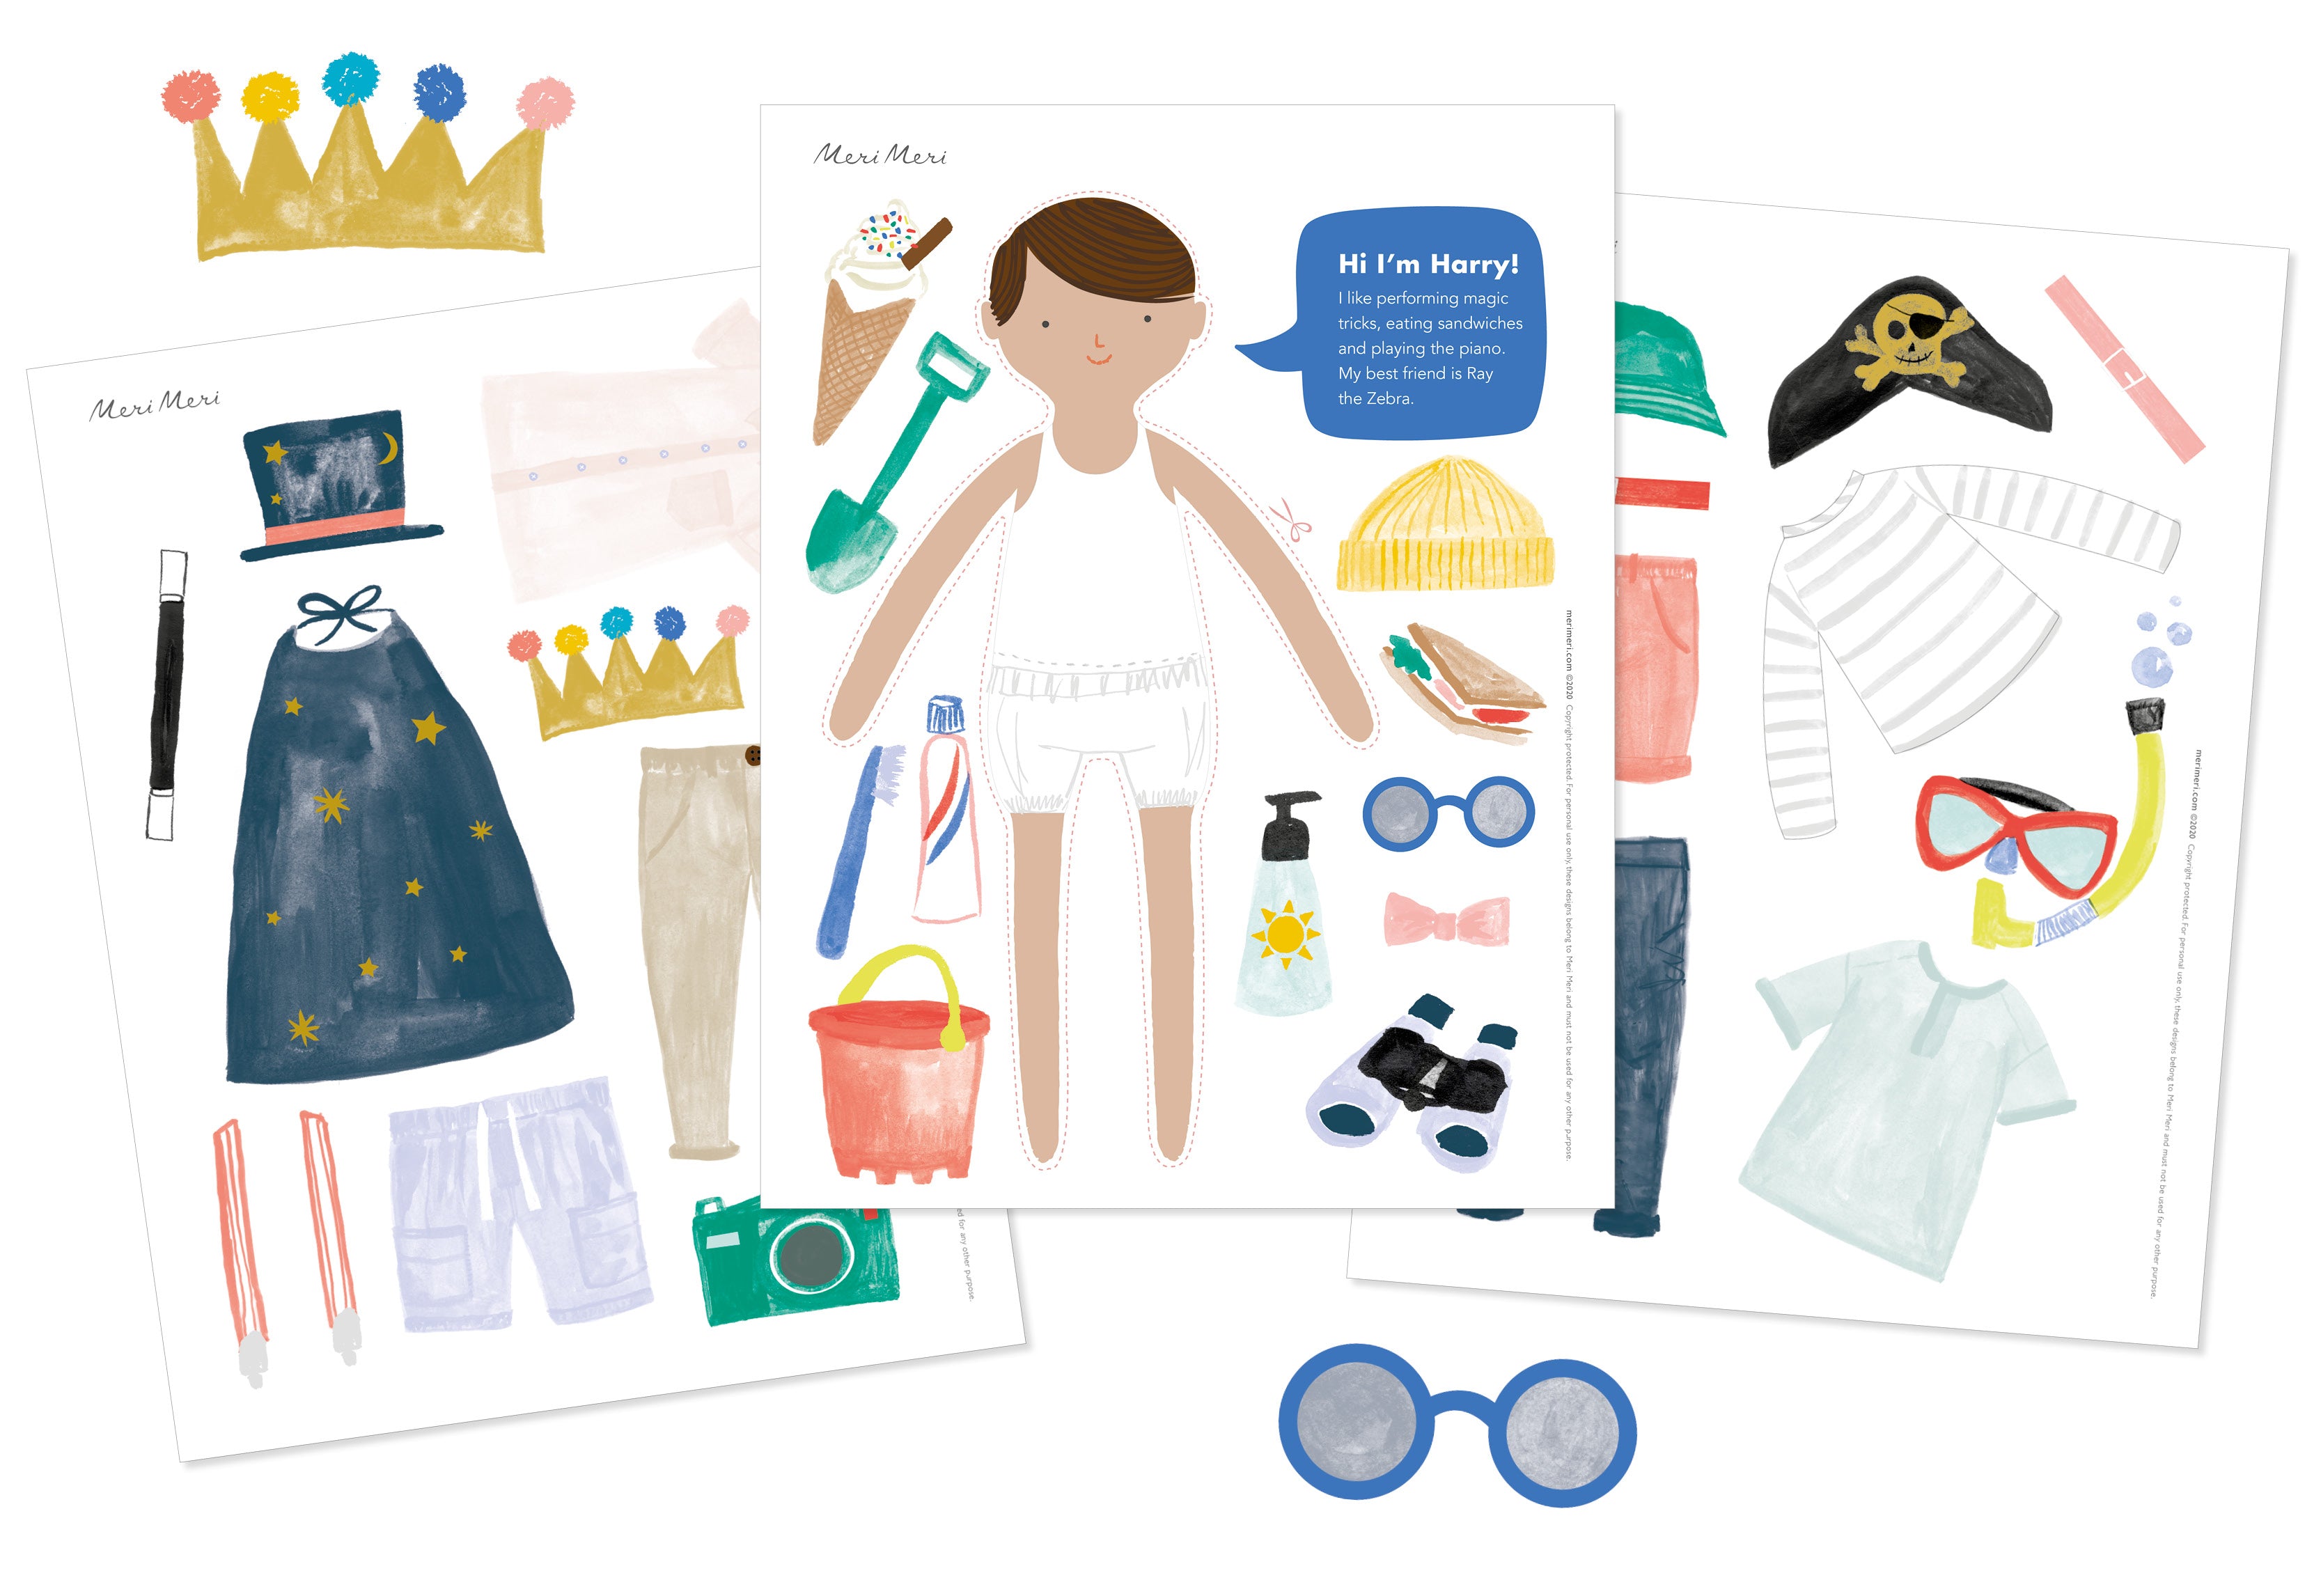 Play paper doll dress up with our wonderful designs